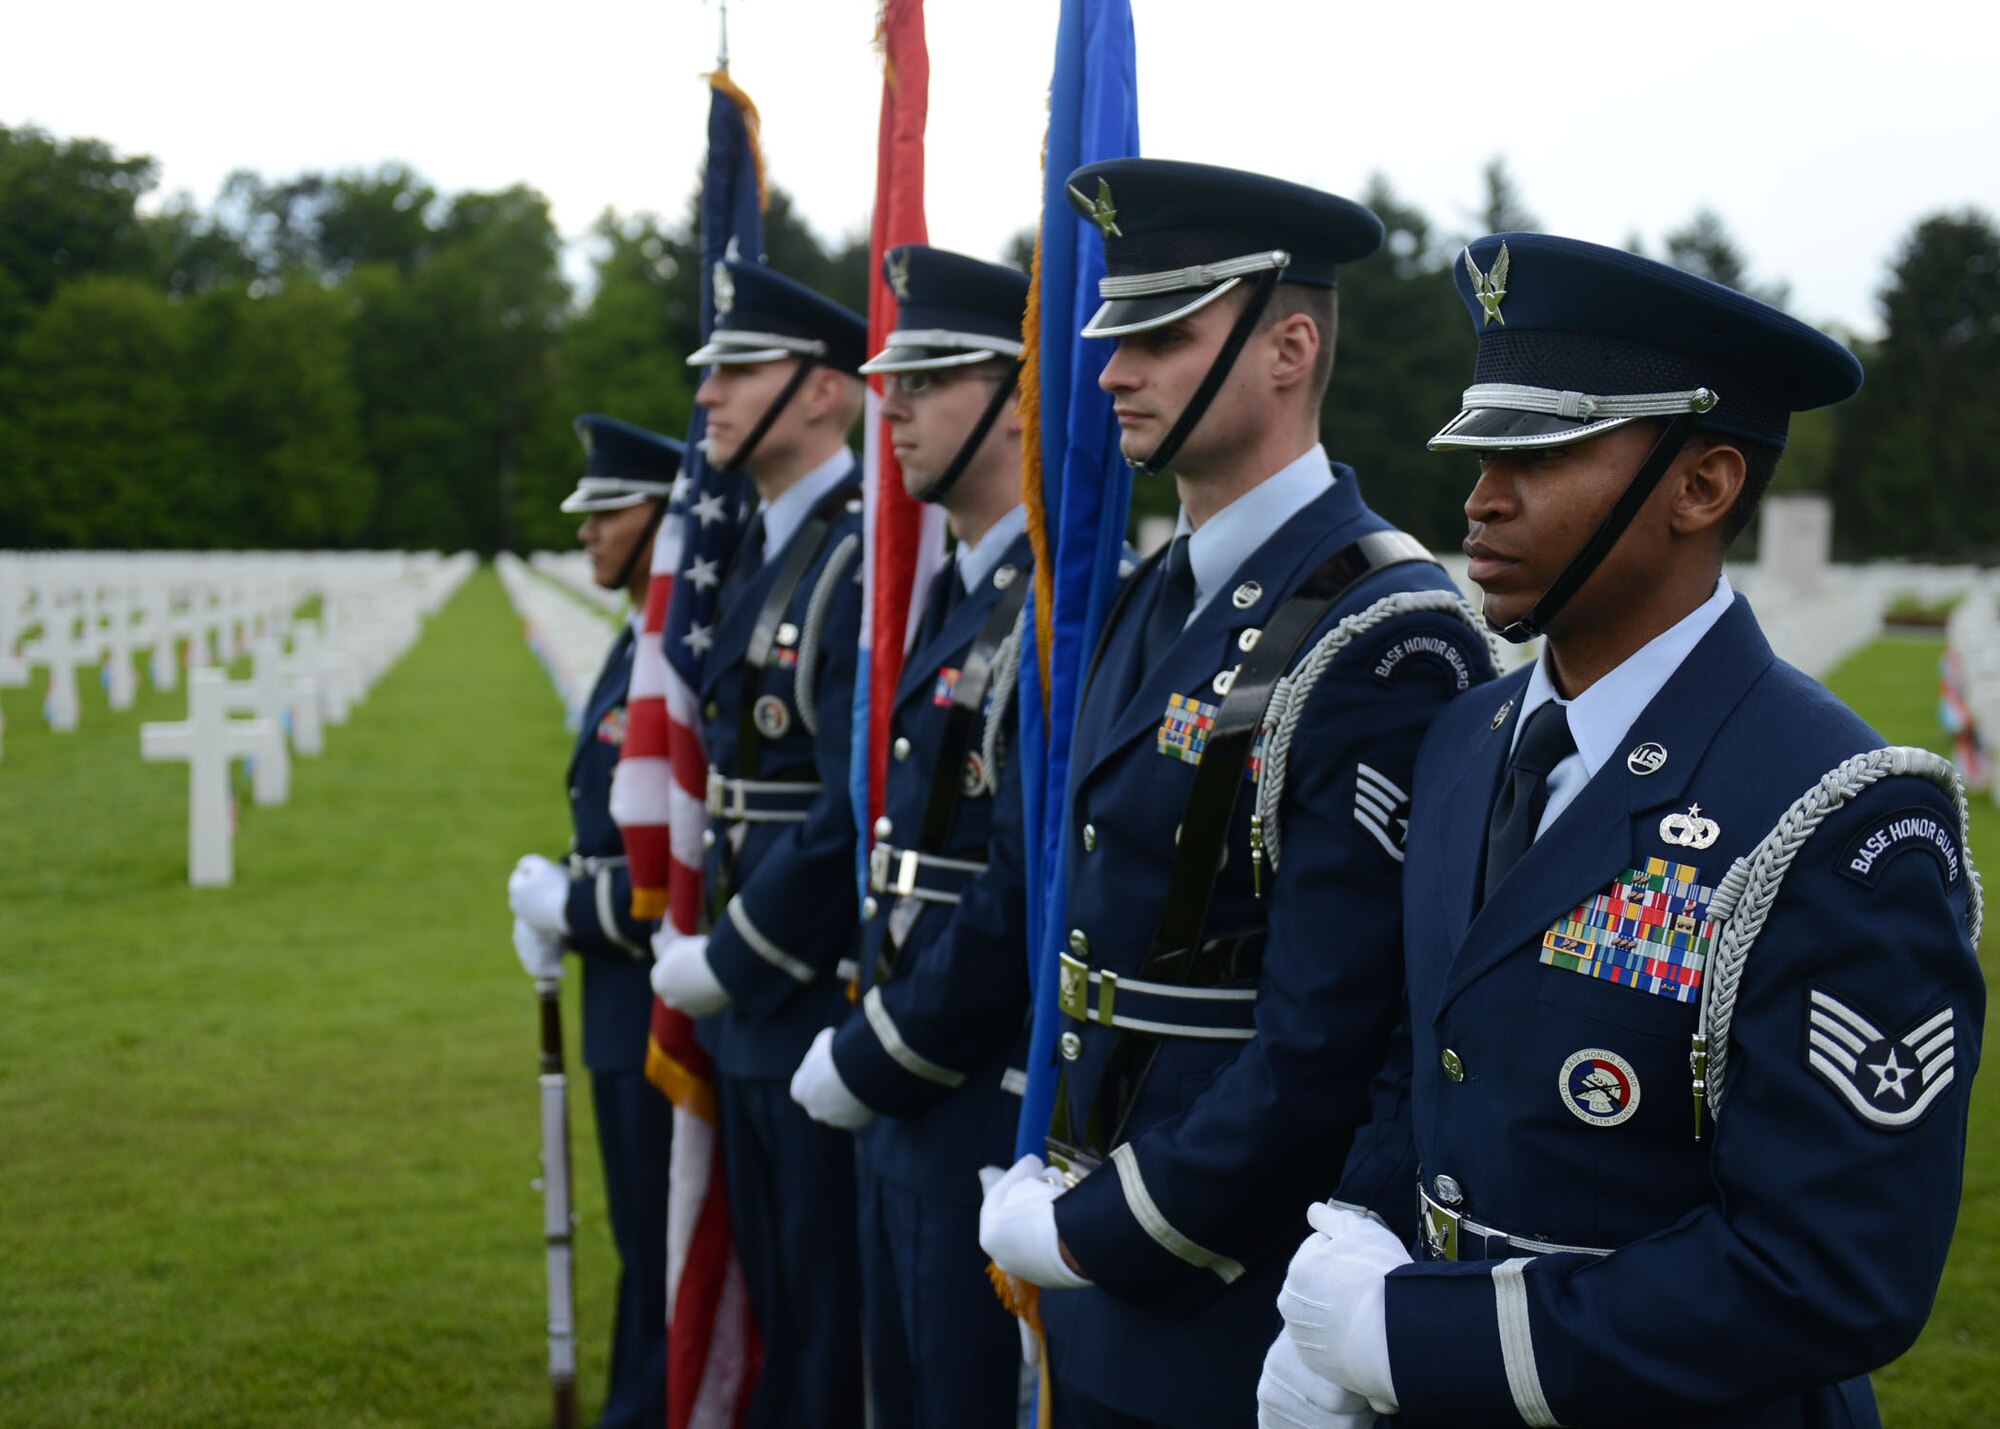 LUXEMBOURG – Members of the Spangdahlem honor guard stand in formation during a Memorial Day commemoration at the Luxembourg American Military Cemetery and Memorial May 25, 2013. As part of the formation, the Airmen posted and presented the flags during a 21-gun salute and the playing of taps to mark the end of the ceremony. (U.S. Air Force photo by Airman 1st Class Gustavo Castillo/Released)